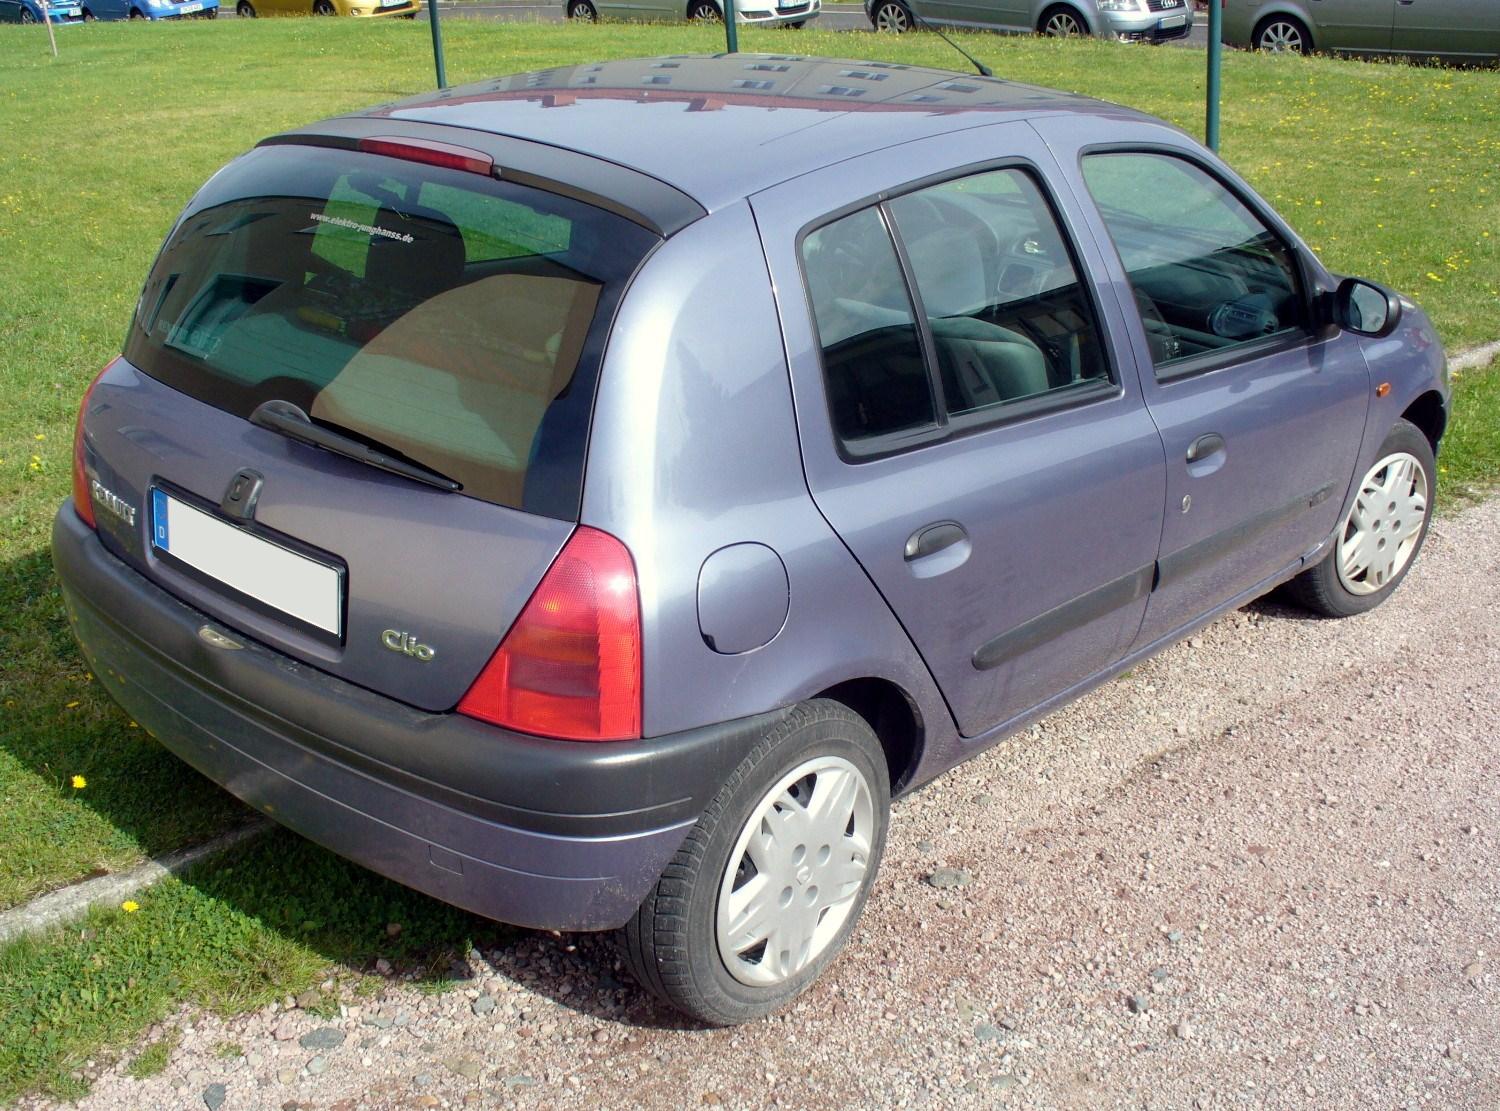 https://upload.wikimedia.org/wikipedia/commons/7/7b/Renault_Clio_II_Phase_I_F%C3%BCnft%C3%BCrer_1.2_Heck.JPG